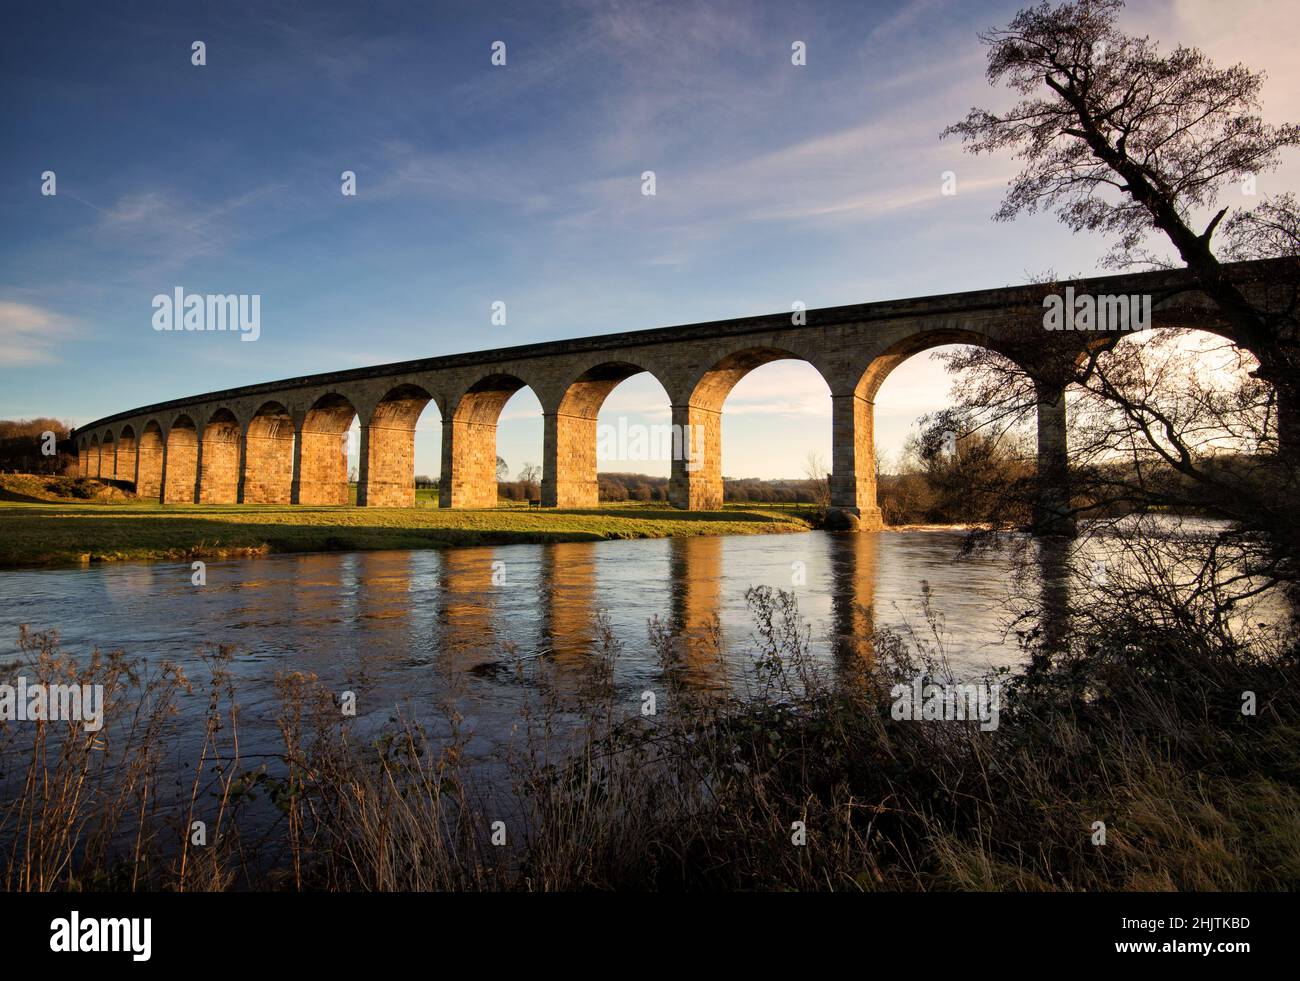 Arthington viaduct, seen from the foliage on the bank of the River Wharfe Stock Photo